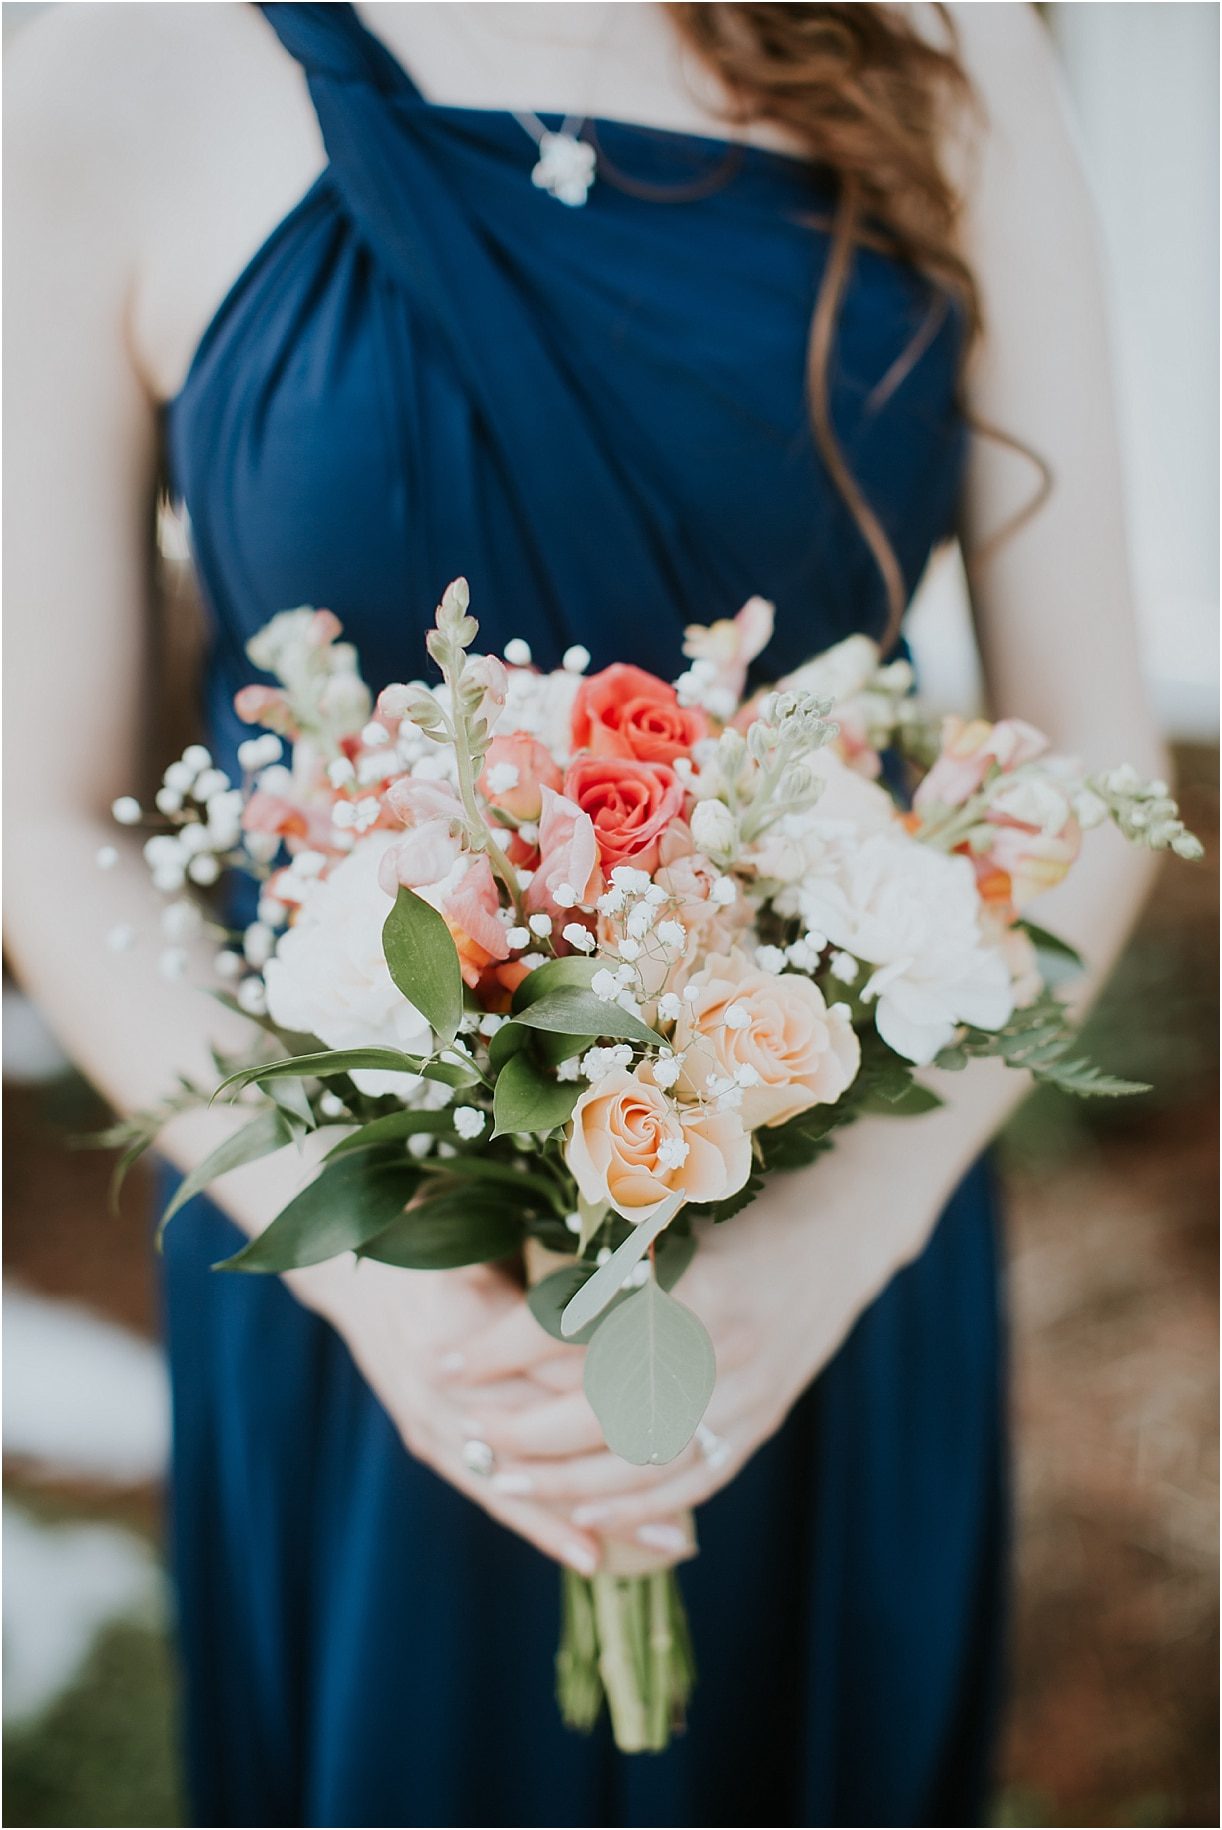 Lovely Virginia Vineyard Wedding as seen on Hill City Bride Blog by Vness Photography - bouquet